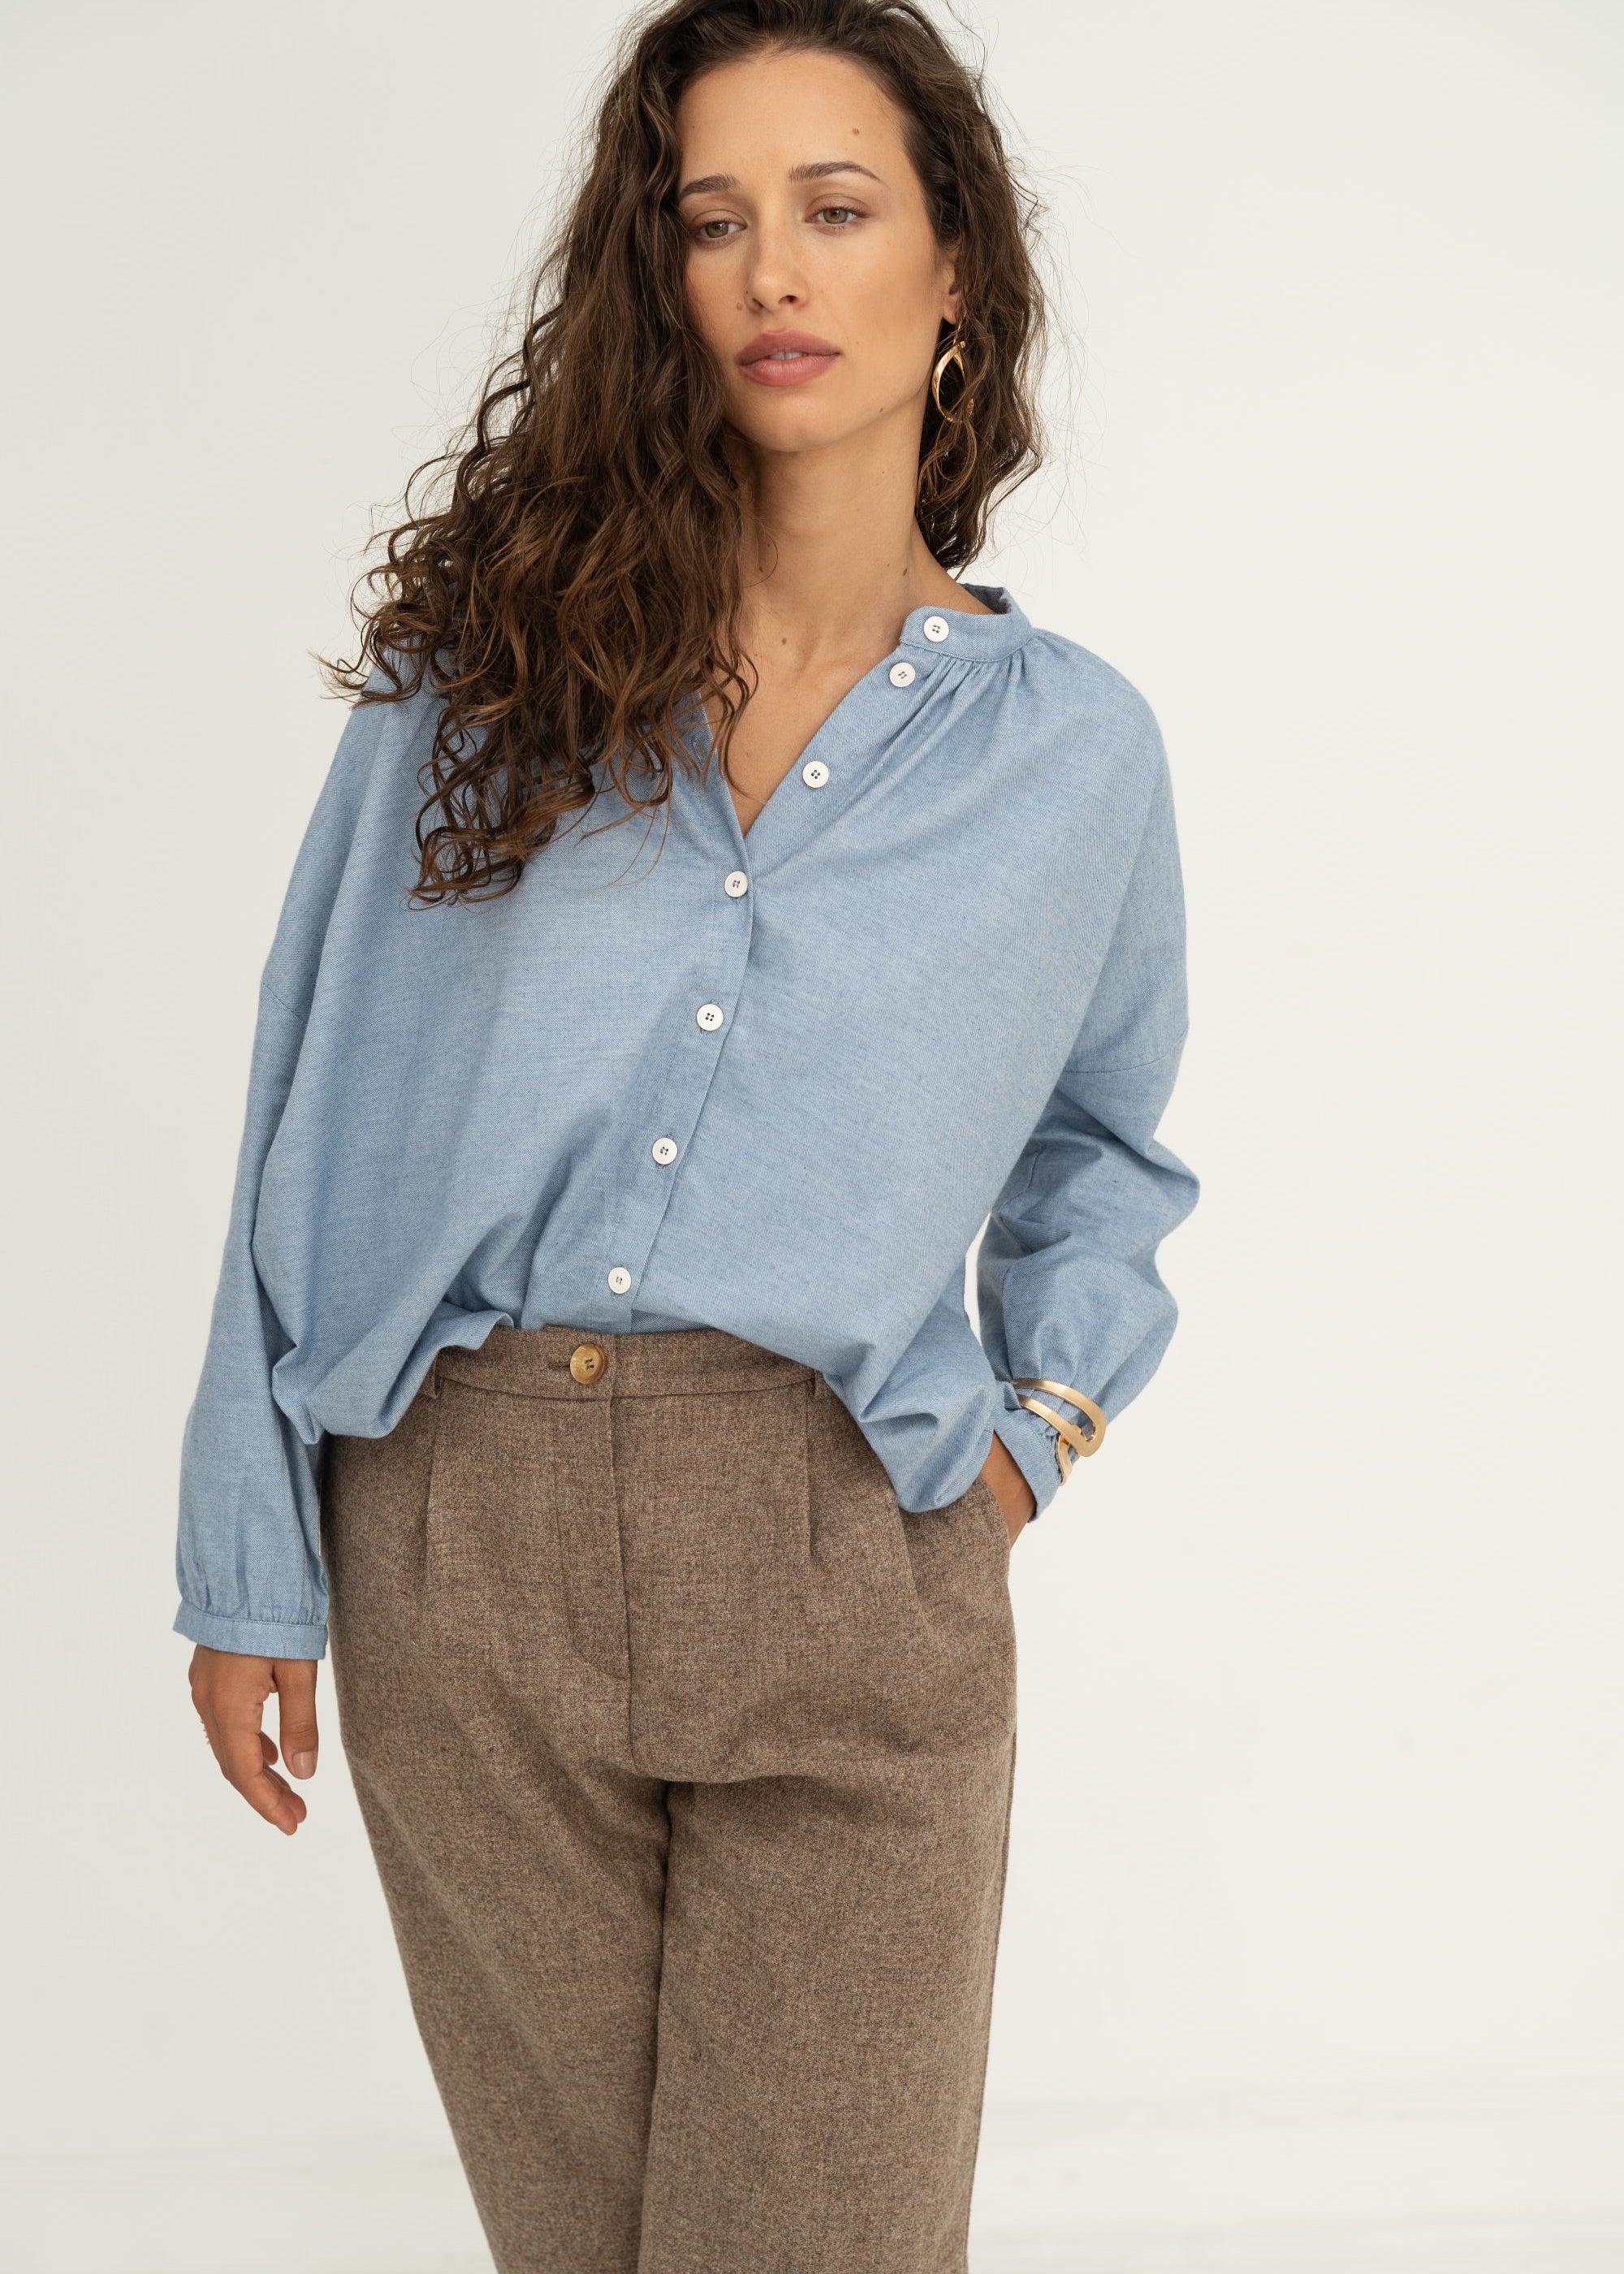 Naz long-sleeve buttoned blouse in wintery cotton-cashmere blend in blue. (Made from recycled materials).